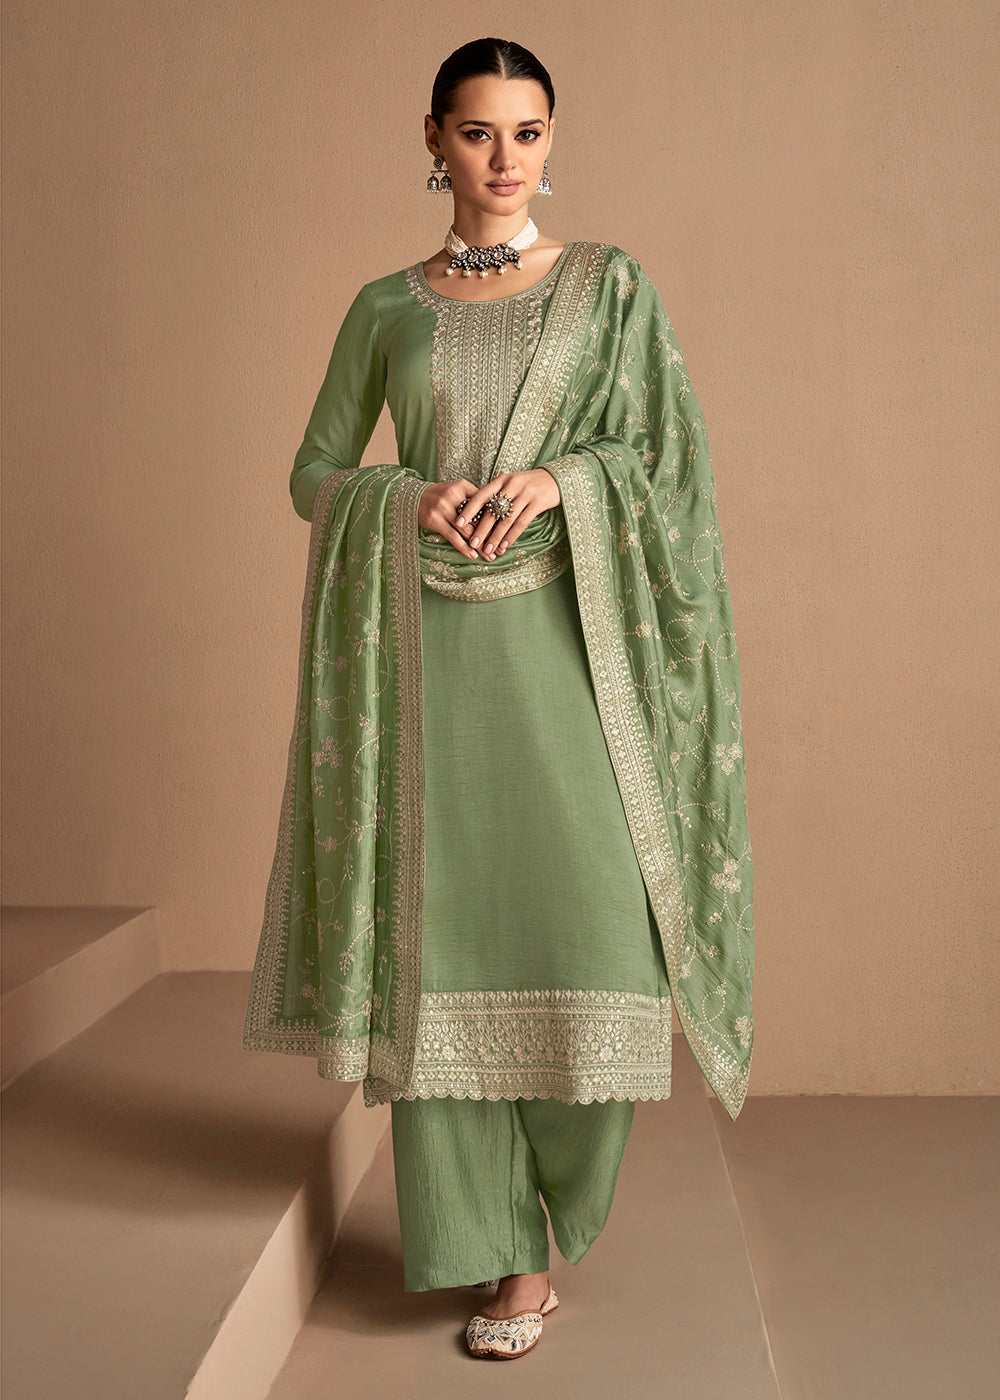 Buy Now Beautiful Soft Green & Gold Embroidered Premium Silk Salwar Suit Online in USA, UK, Canada, Germany, Australia & Worldwide at Empress Clothing. 